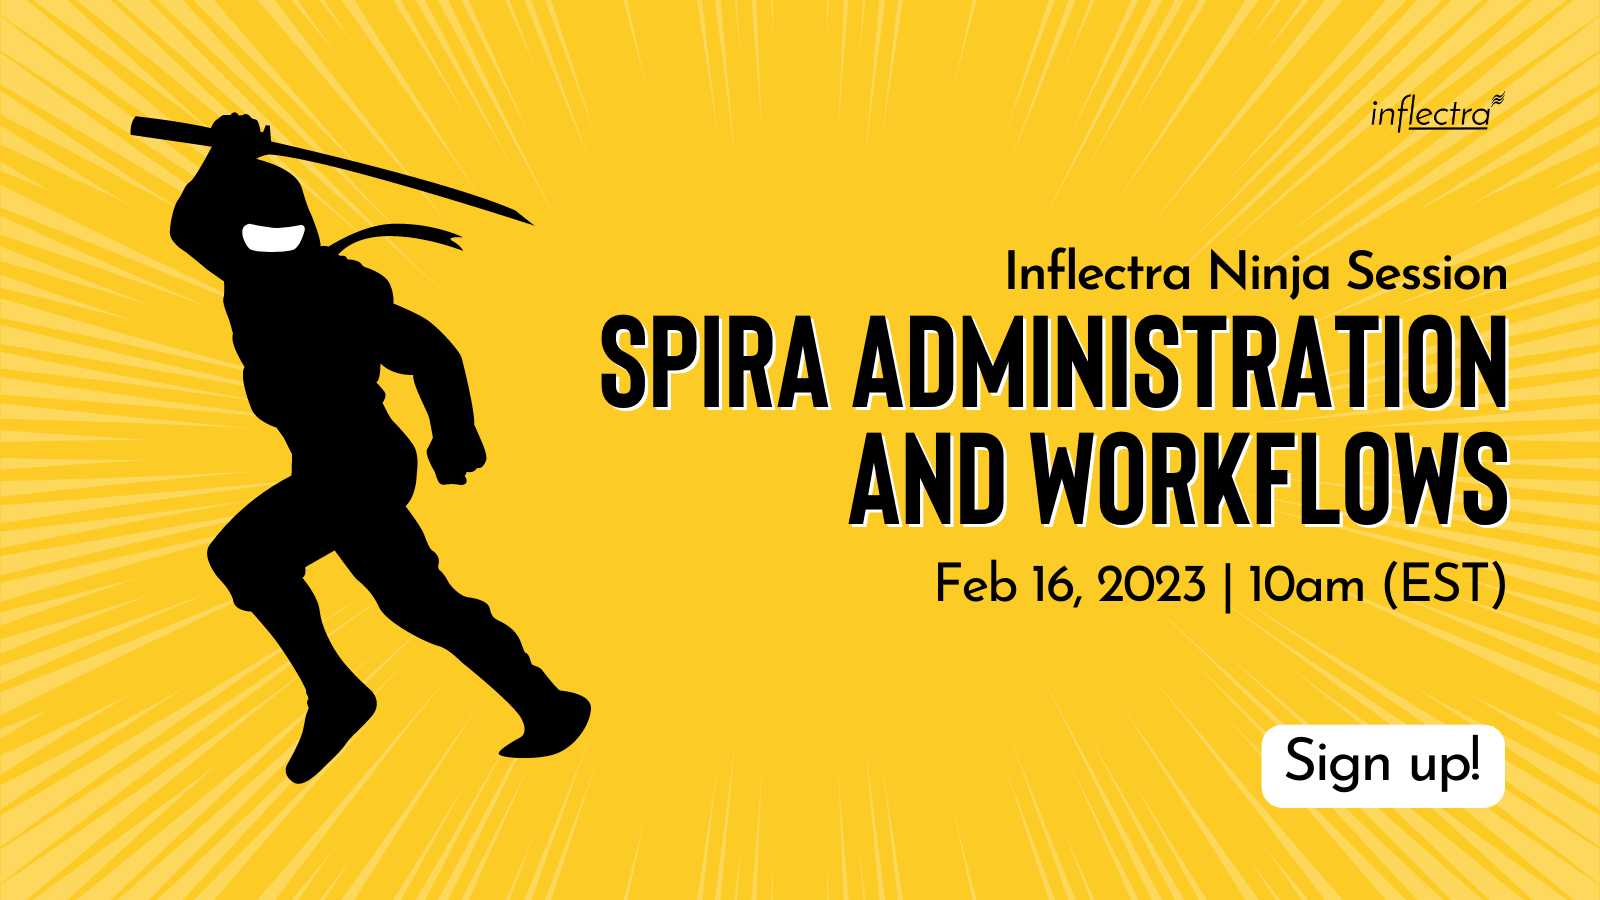 inflectra-ninjas-session-spira-administration-and-workflows-yellow-background-black-text-image